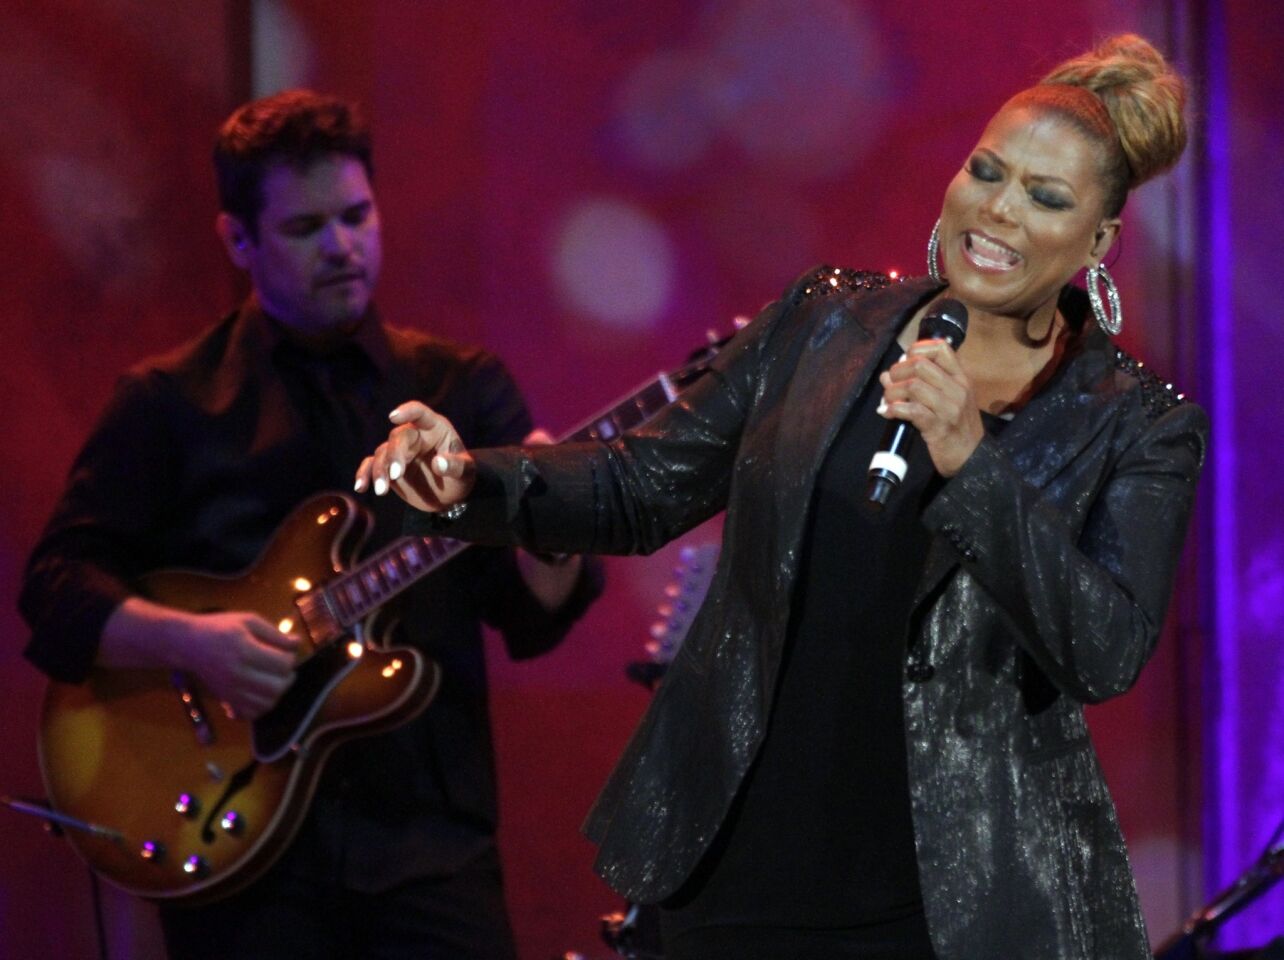 Latifah performed a blend of soul and jazz when she headlined the Hollywood Bowl in July.